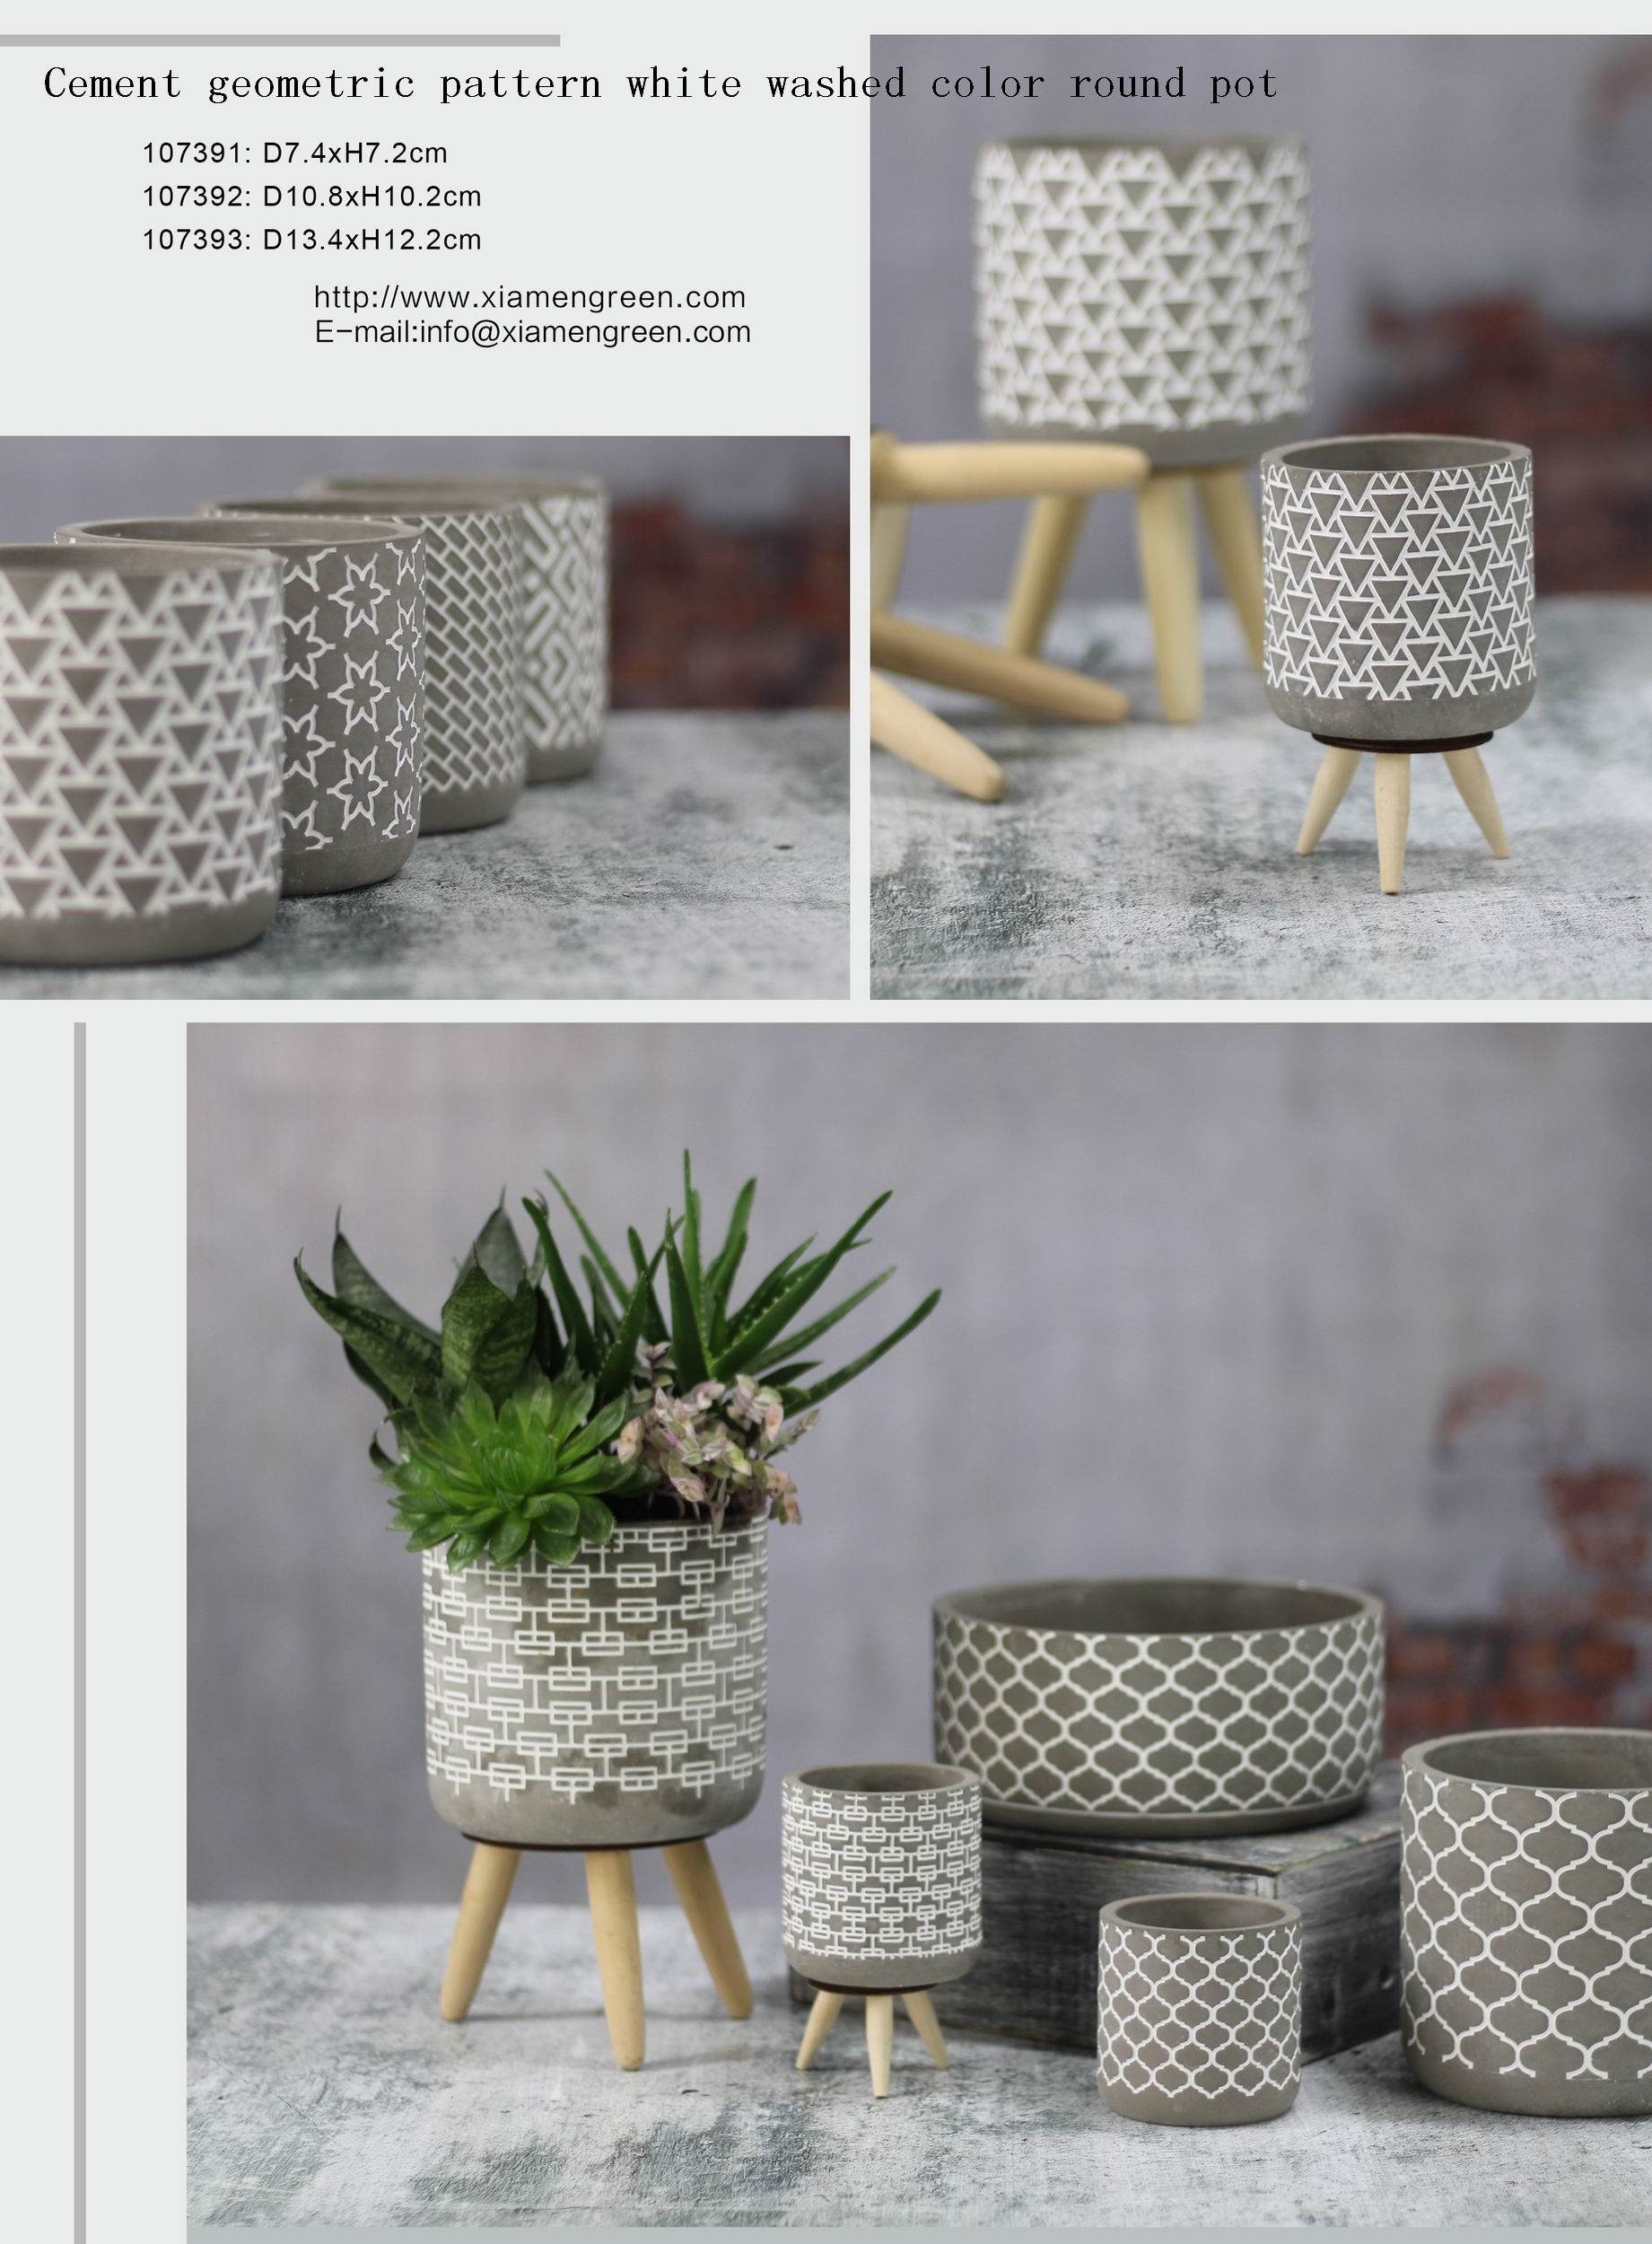 Dolomite three tone stripes round pot op6/Cement geometric pattern white washed color round pot